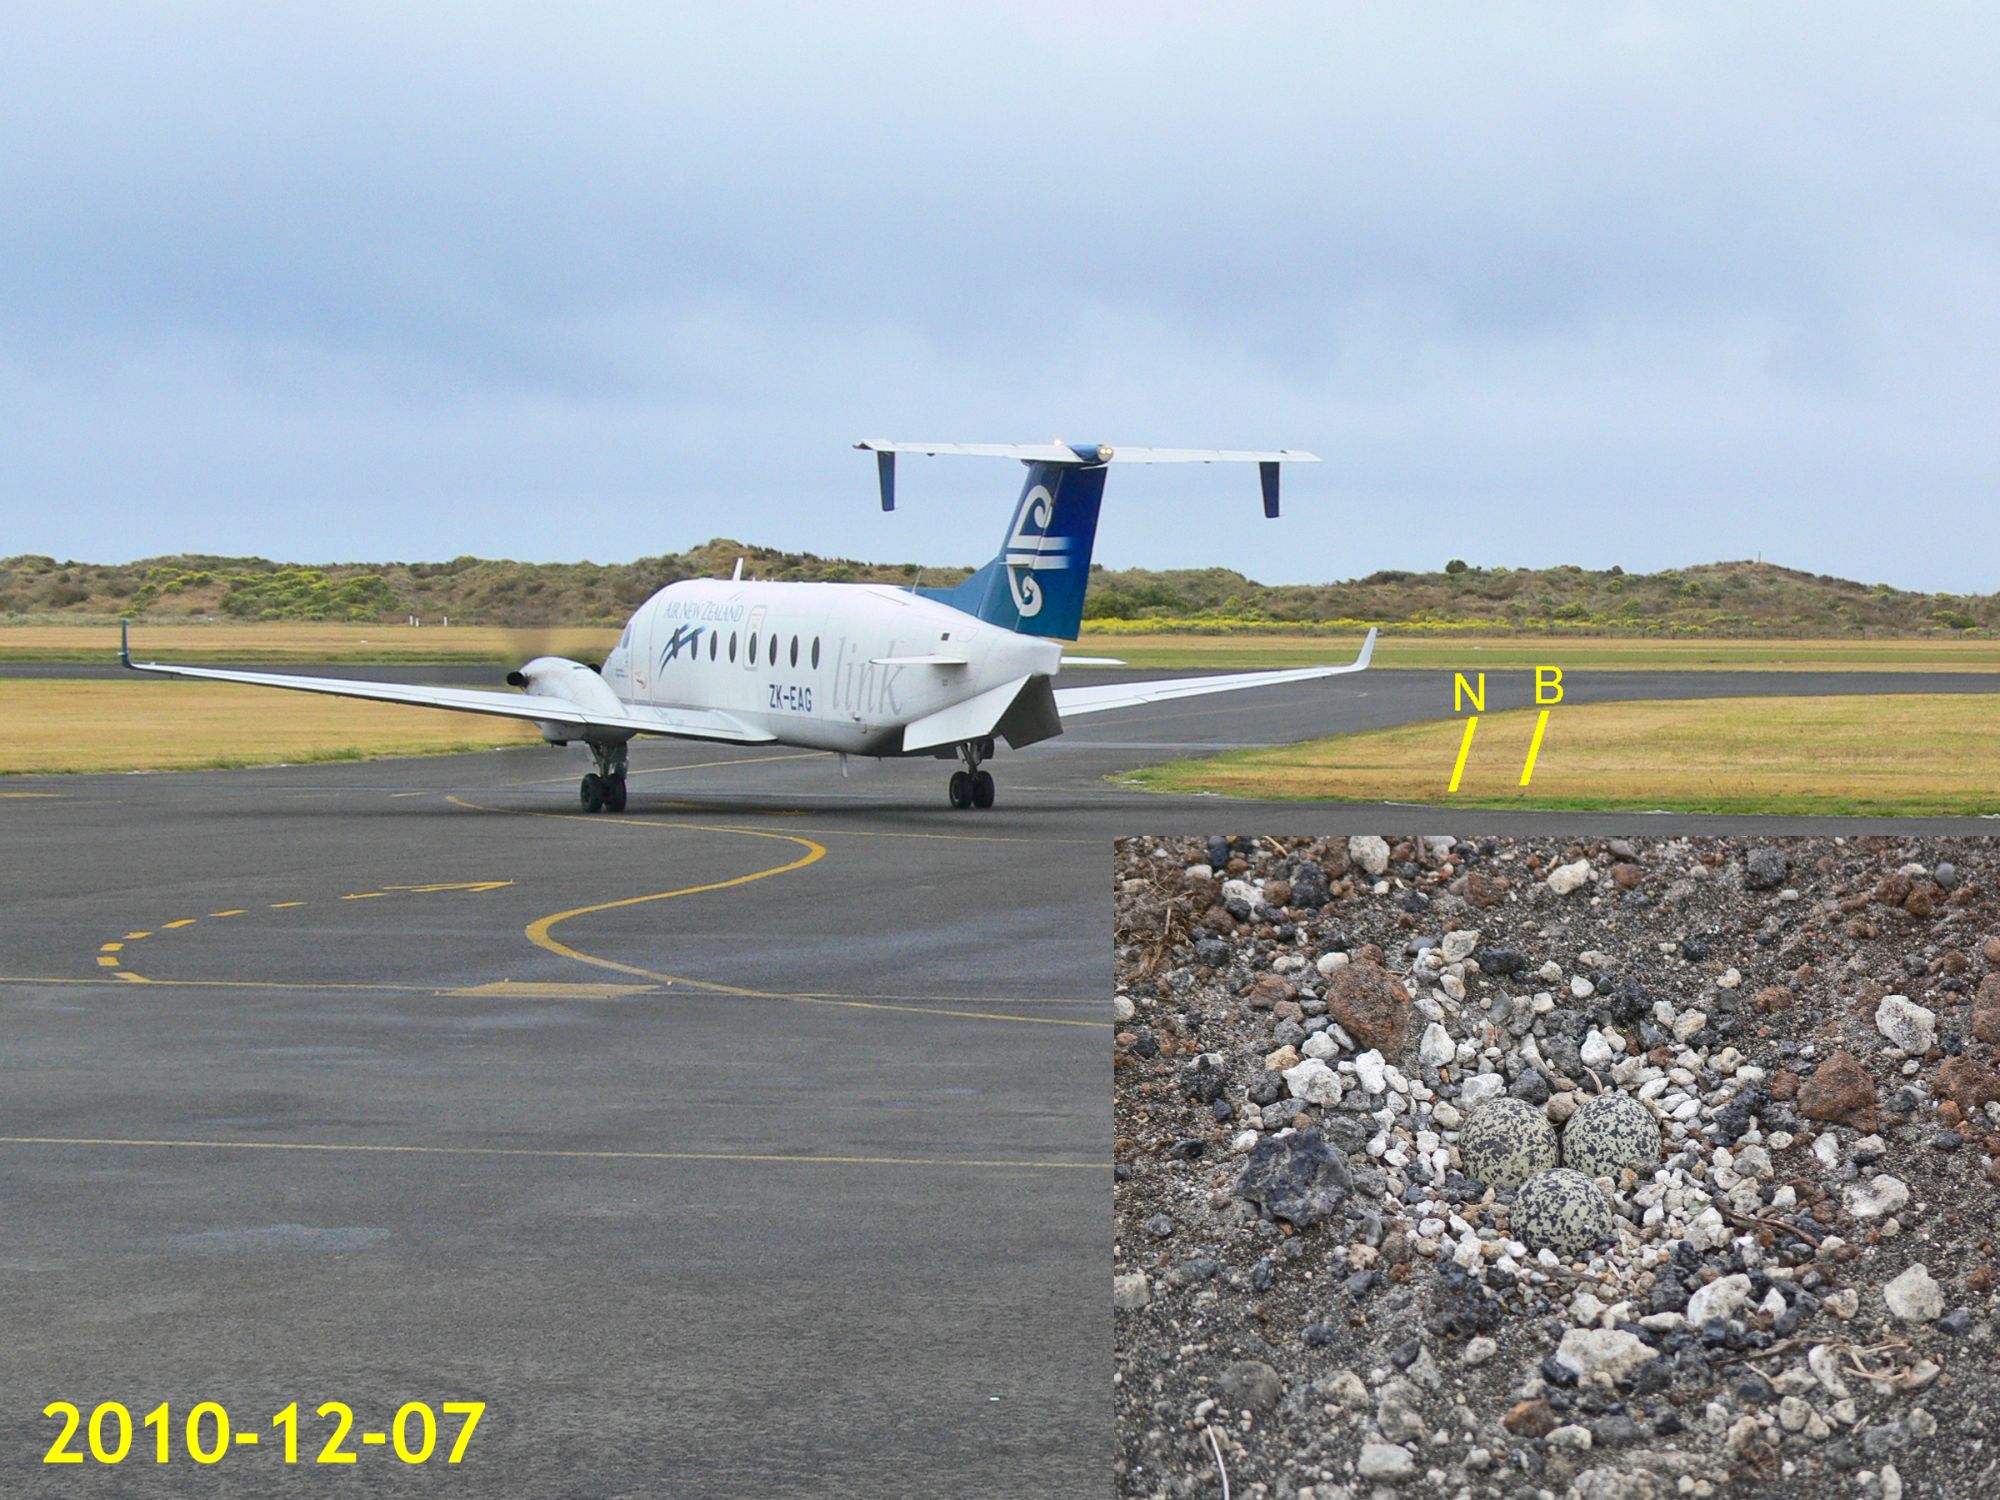 Location of a banded dotterel nest ("N") on the edge of the taxiway, with an Air New Zealand plane heading out for take-off, briefly causing the sitting bird ("B") to get off the nest.